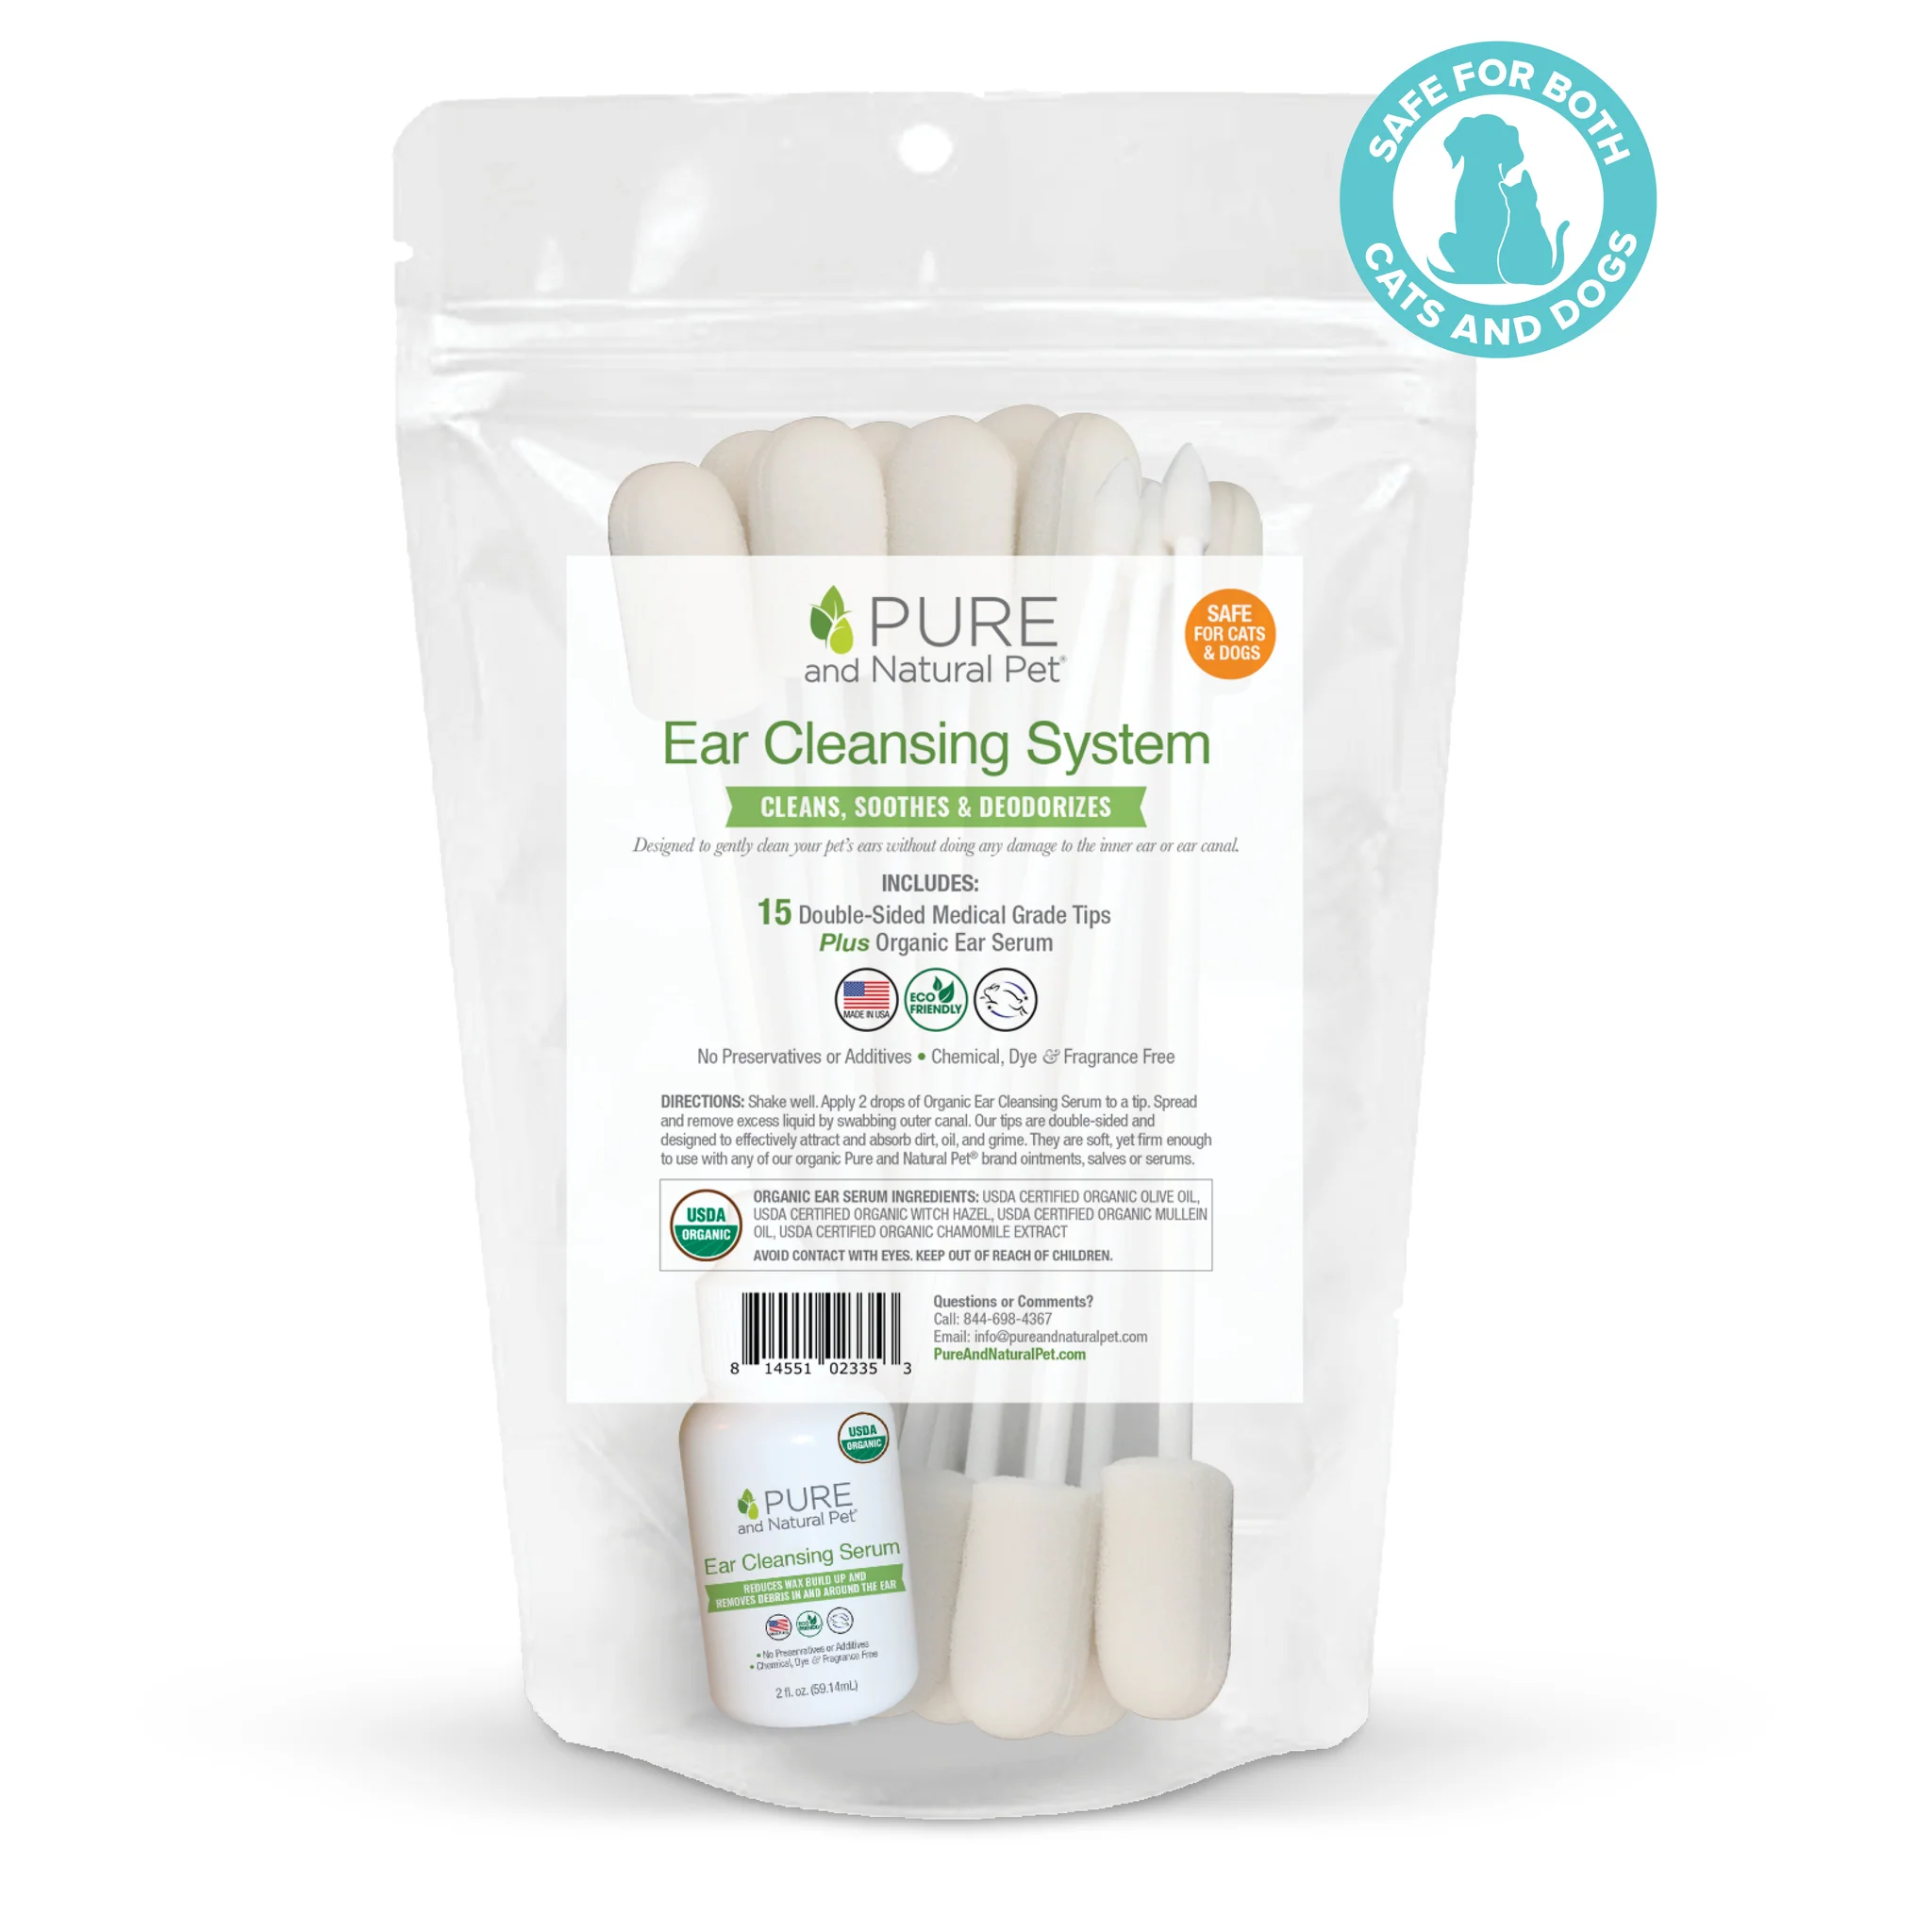 Pure & Natural Ear Cleaning Kit